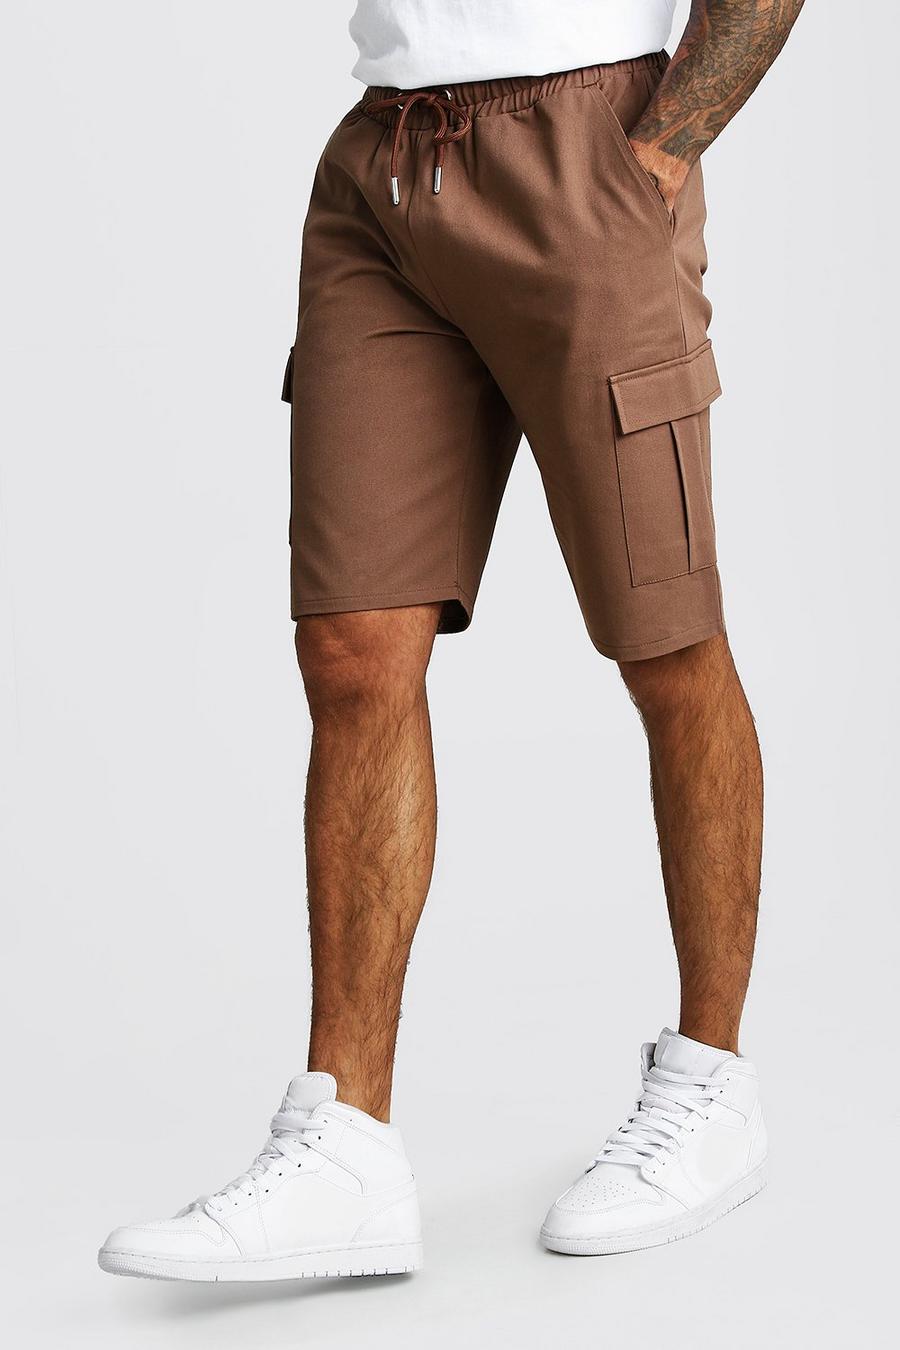 Brown Cargo Shorts With Elasticated Waistband image number 1